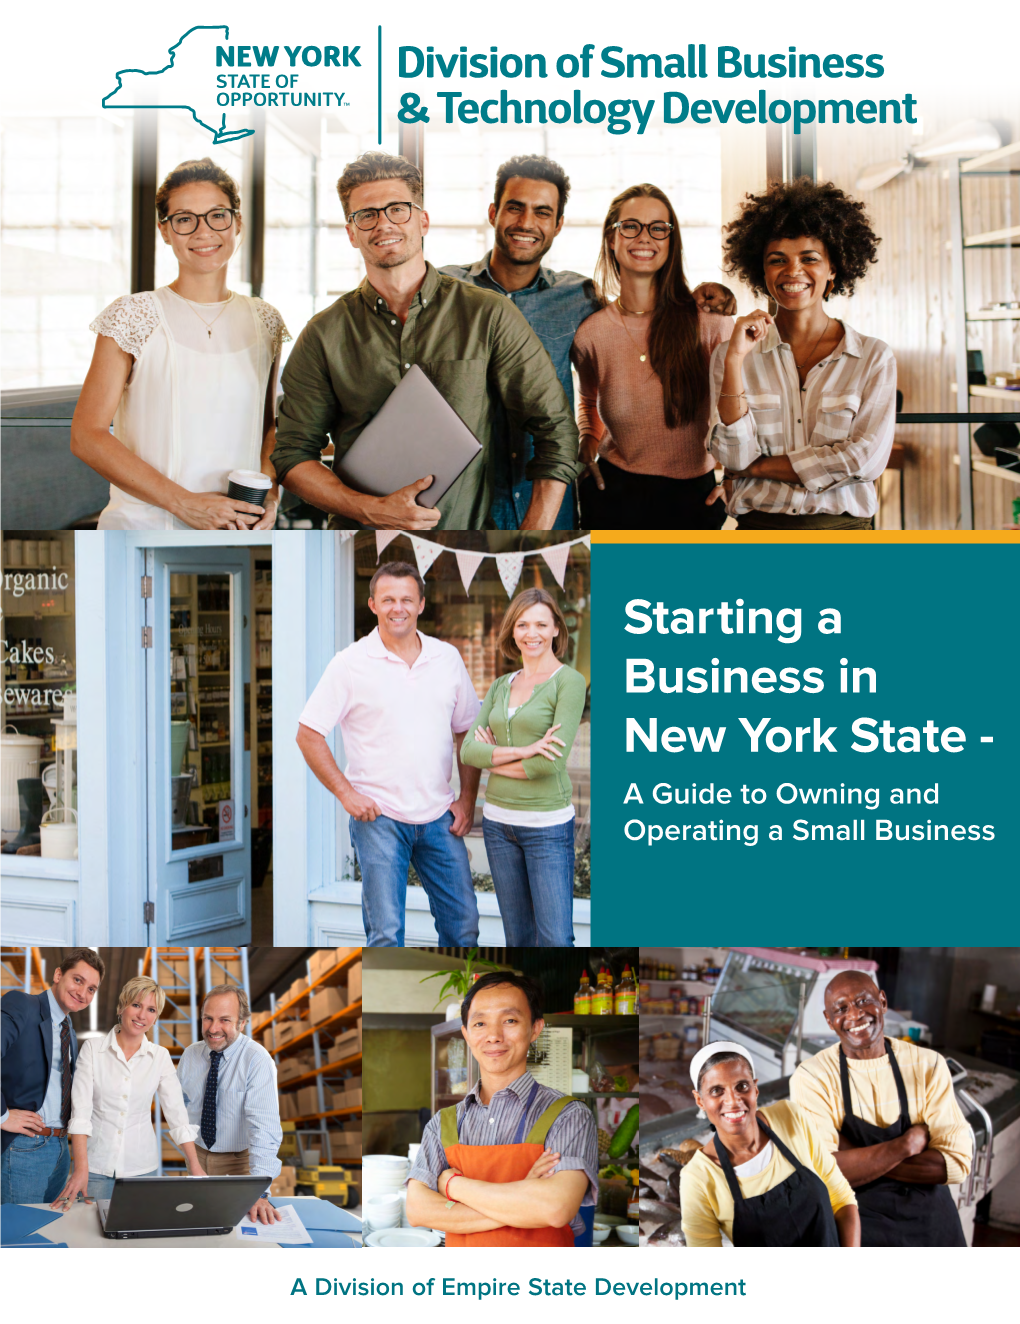 Starting a Business in New York State - a Guide to Owning and Operating a Small Business